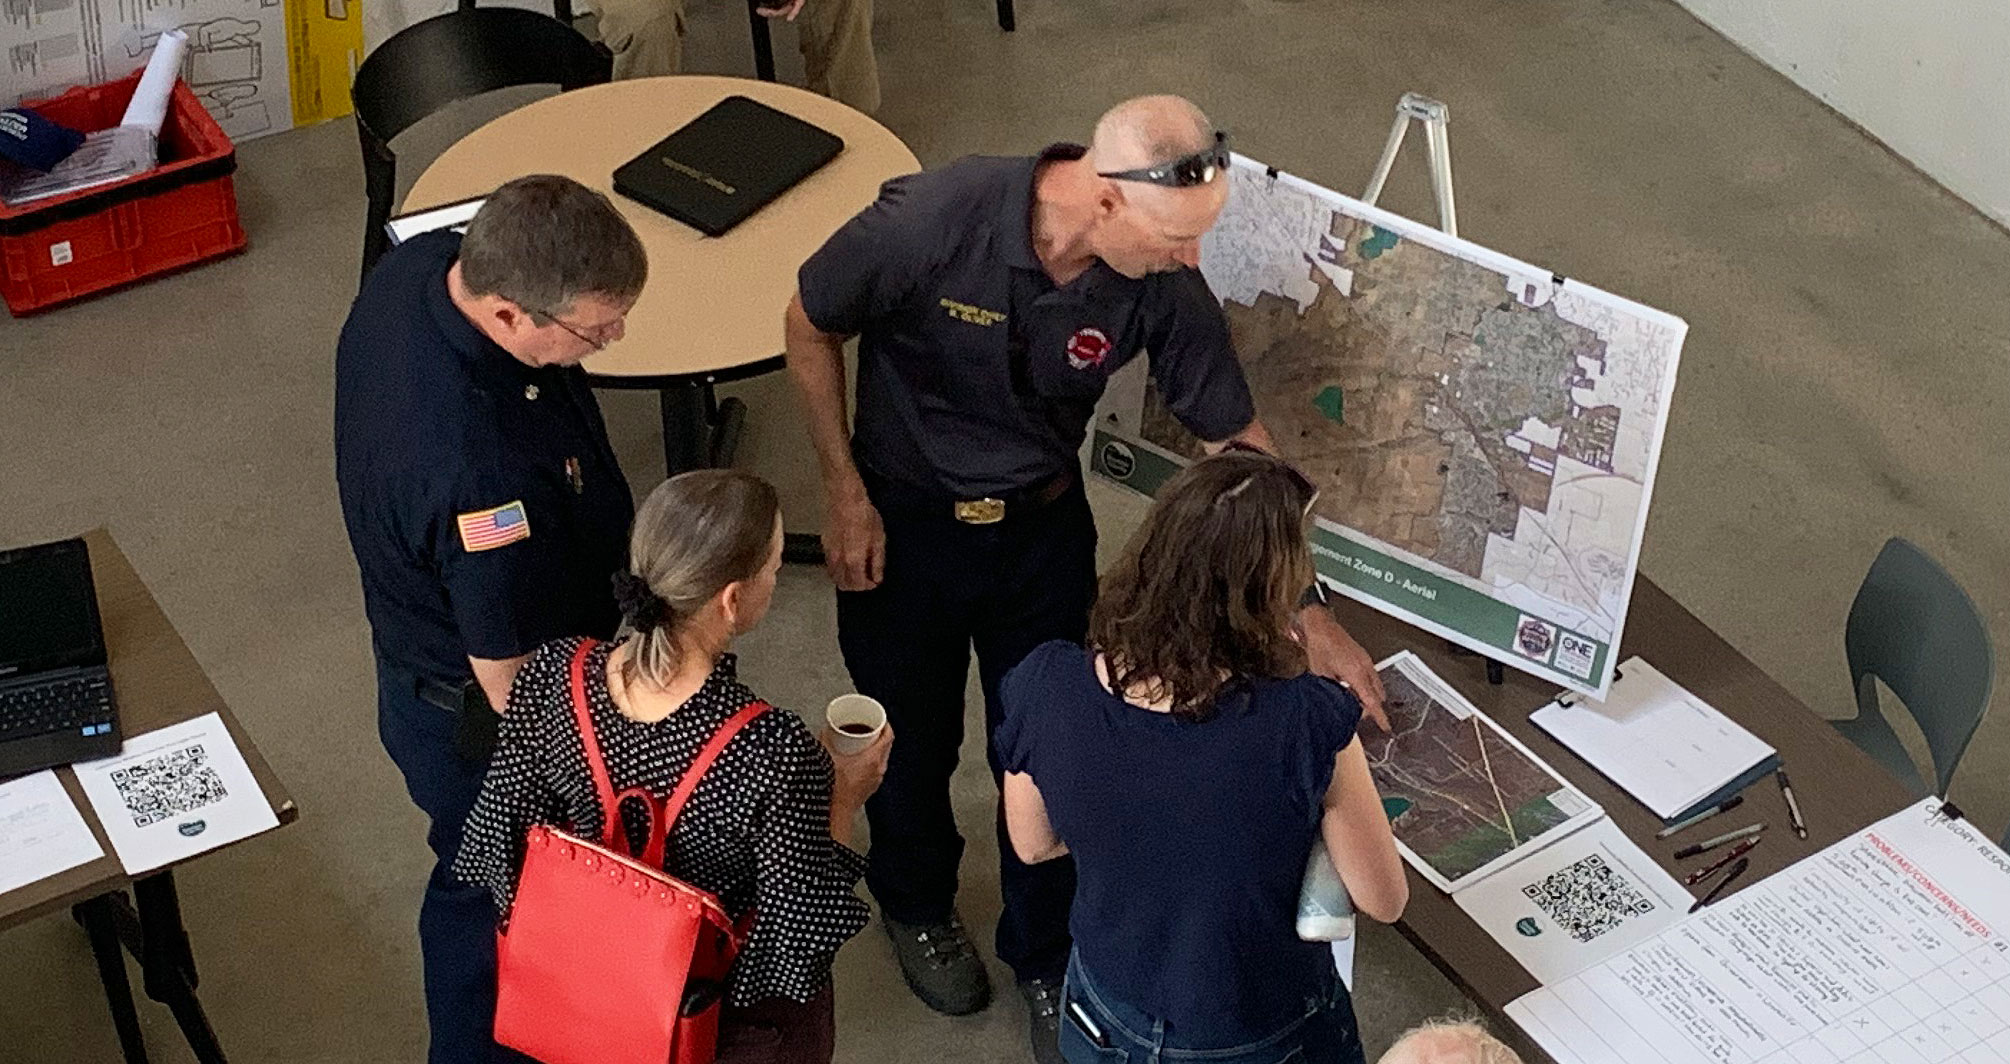 Community Members attending a Wildfire Mitigation meeting, looking at maps and discussing with firemen.